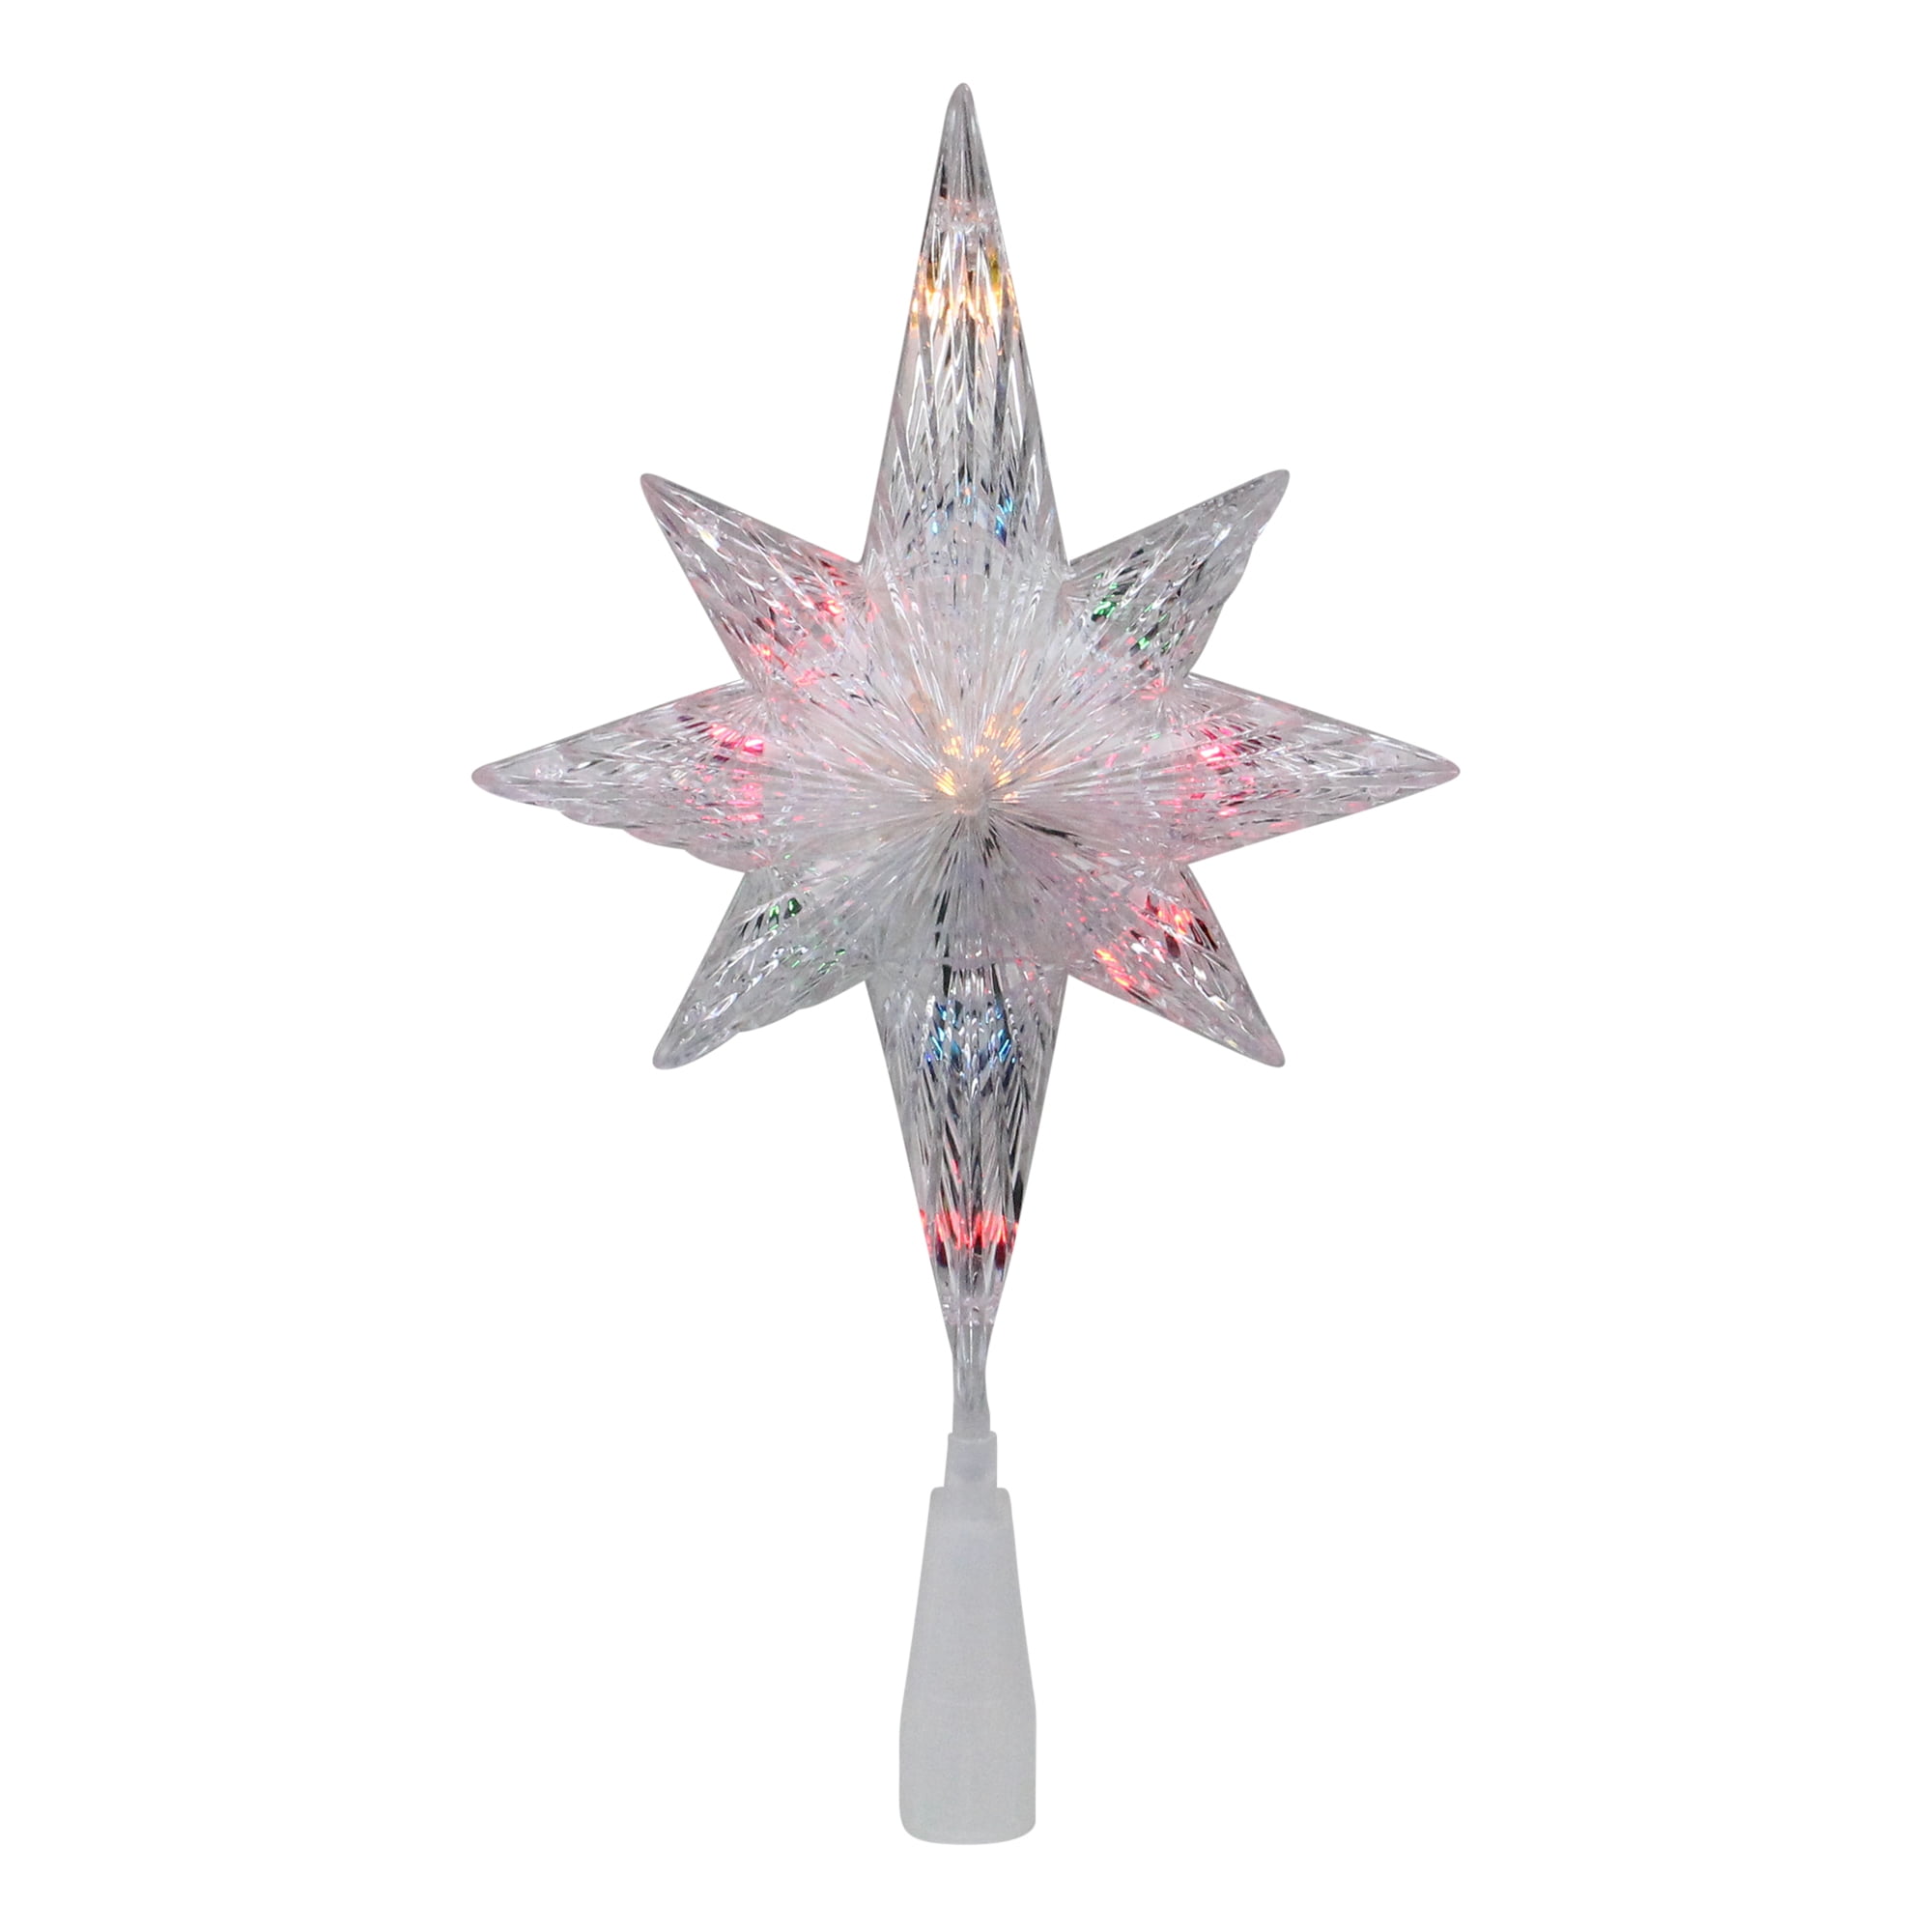 Orange Lighted Christmas Tree Toppers Northlight Accessories